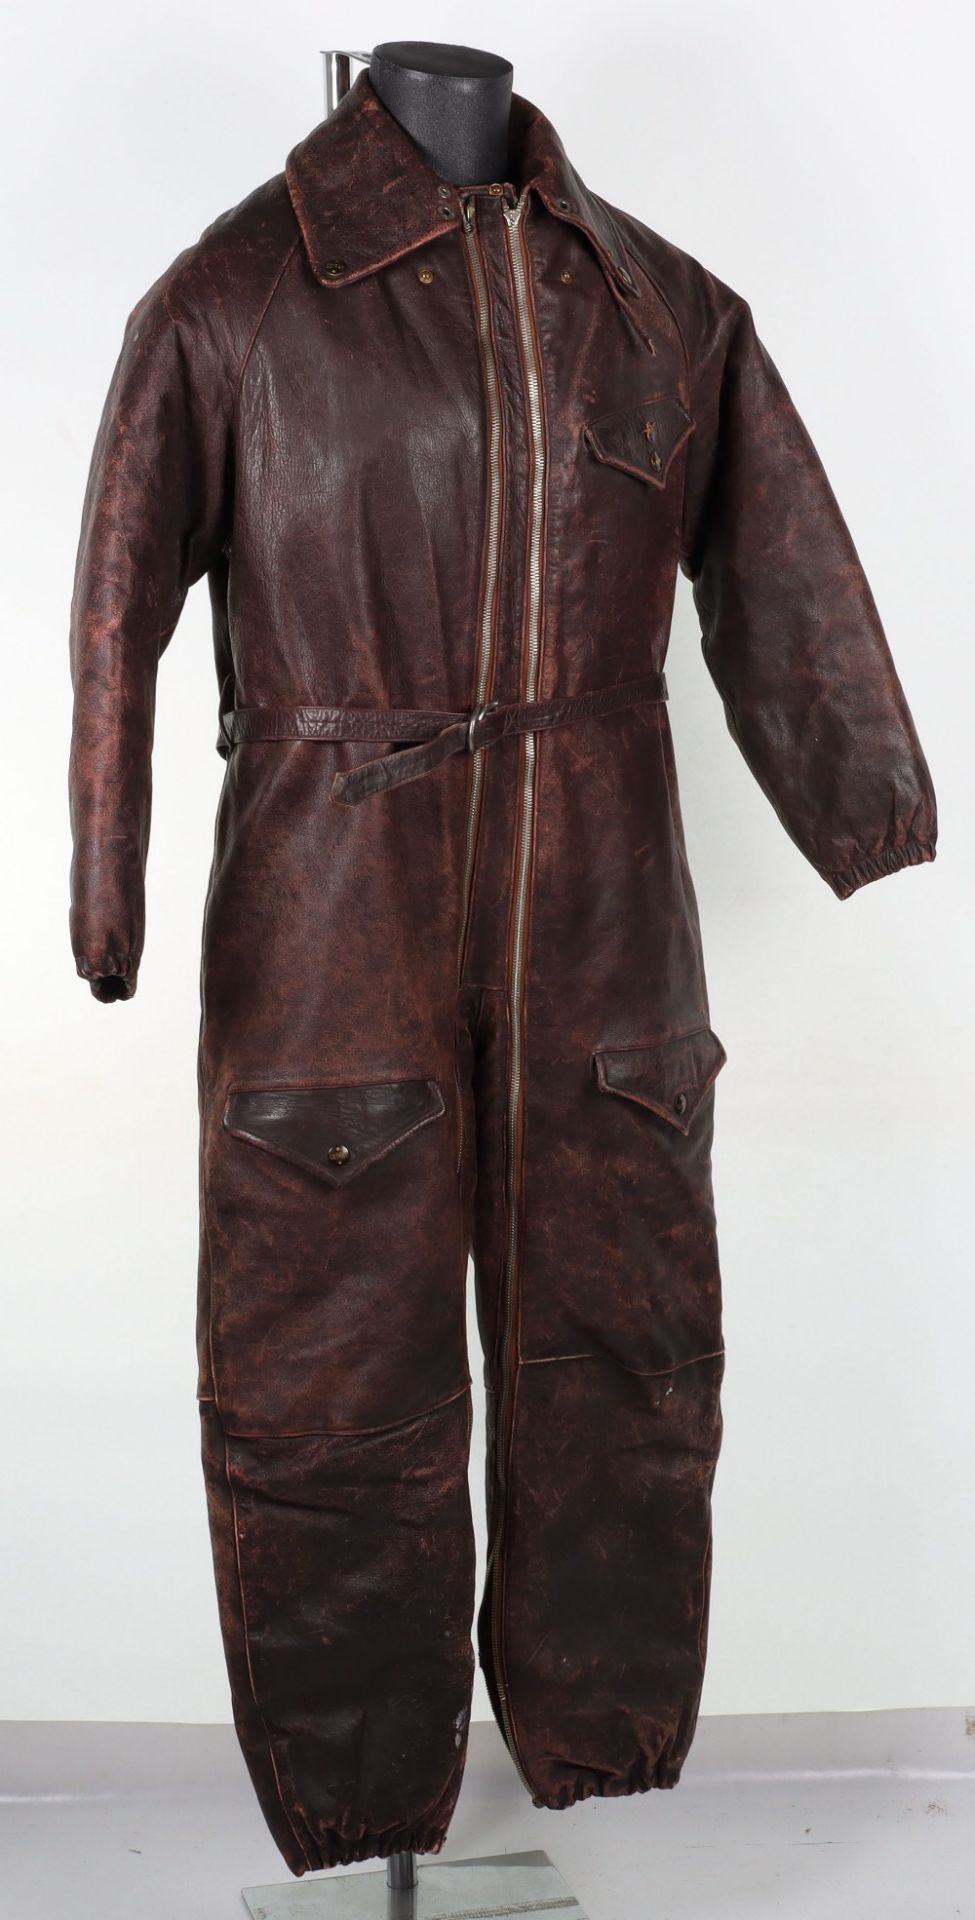 One Piece Leather Flight Suit - Image 7 of 8